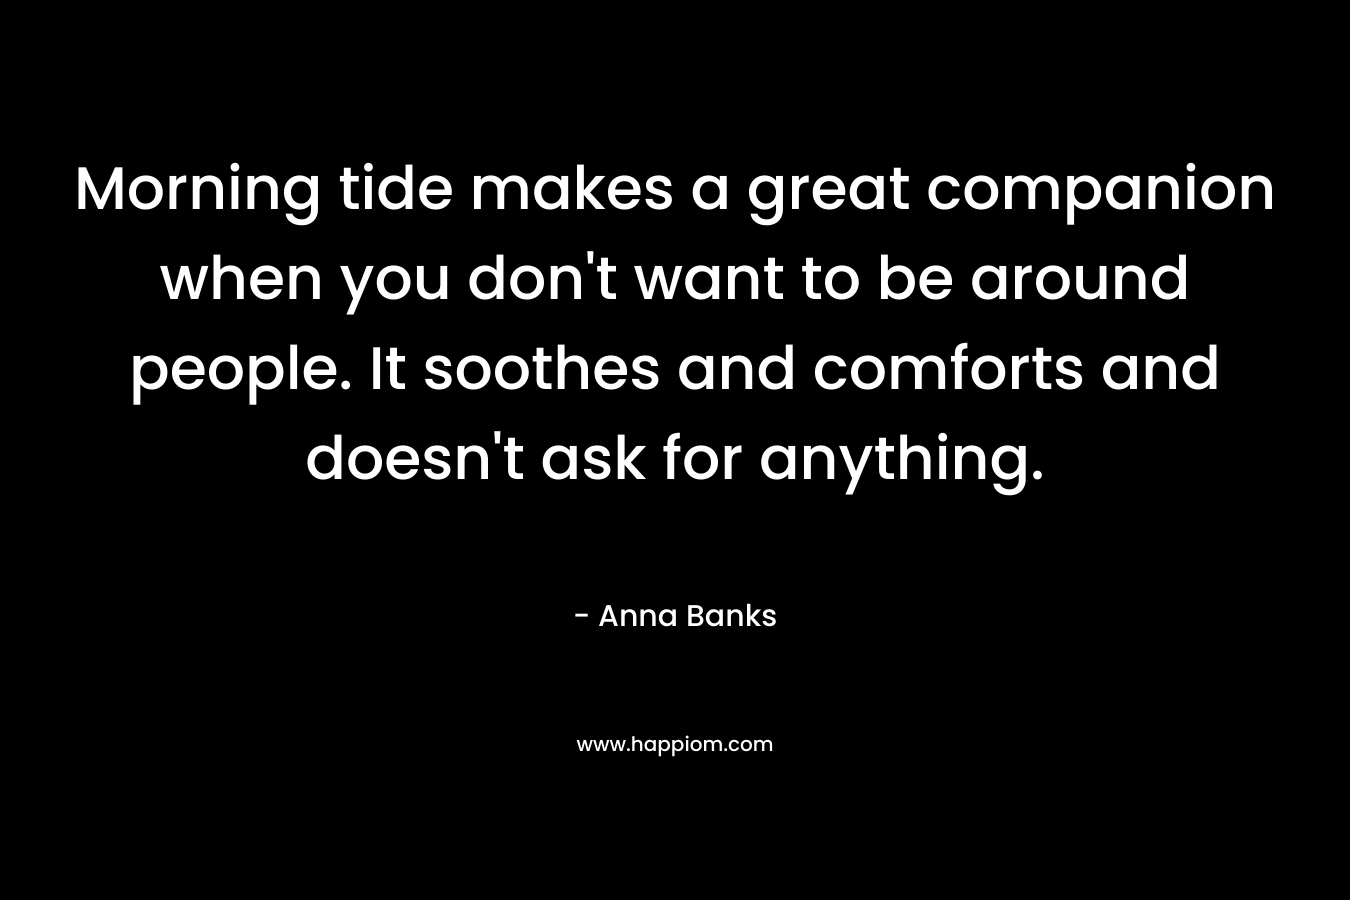 Morning tide makes a great companion when you don’t want to be around people. It soothes and comforts and doesn’t ask for anything. – Anna Banks